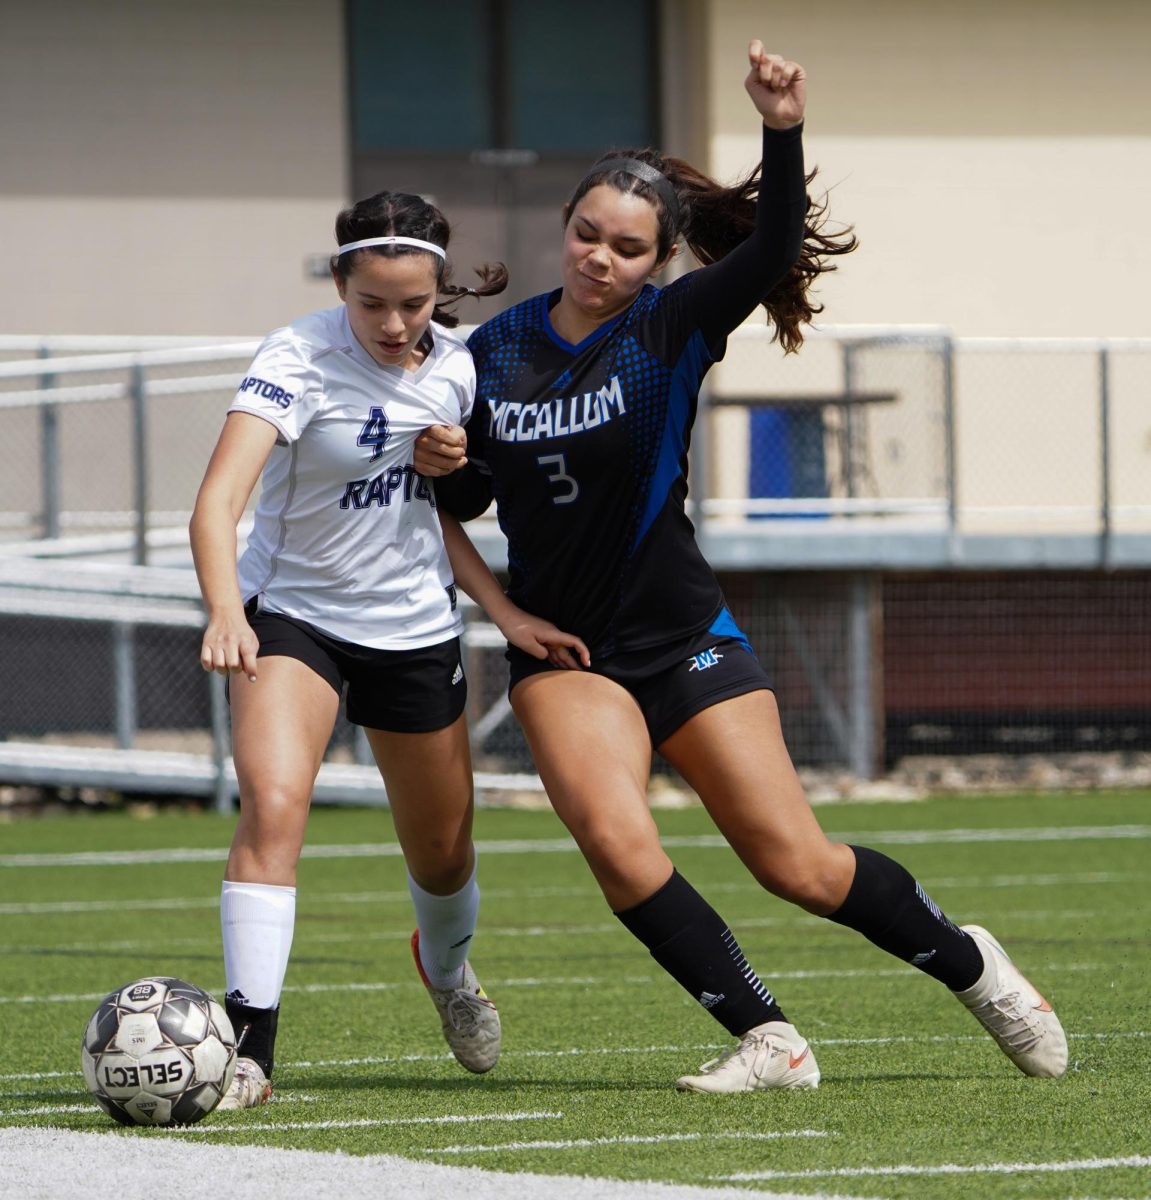 Senior co-captain Sydney Suarez-Wallace battles a LASA opponent for possession during the second half of the Raptors 1-0 win over McCallum in District 24-5A play Saturday morning at House Park. After enjoying a hat trick the Saturday before against LBJ, Suarez-Wallace—like her Knight teammates—were unable to find the net against the Raptors despite creating numerous scoring opportunities in the game.